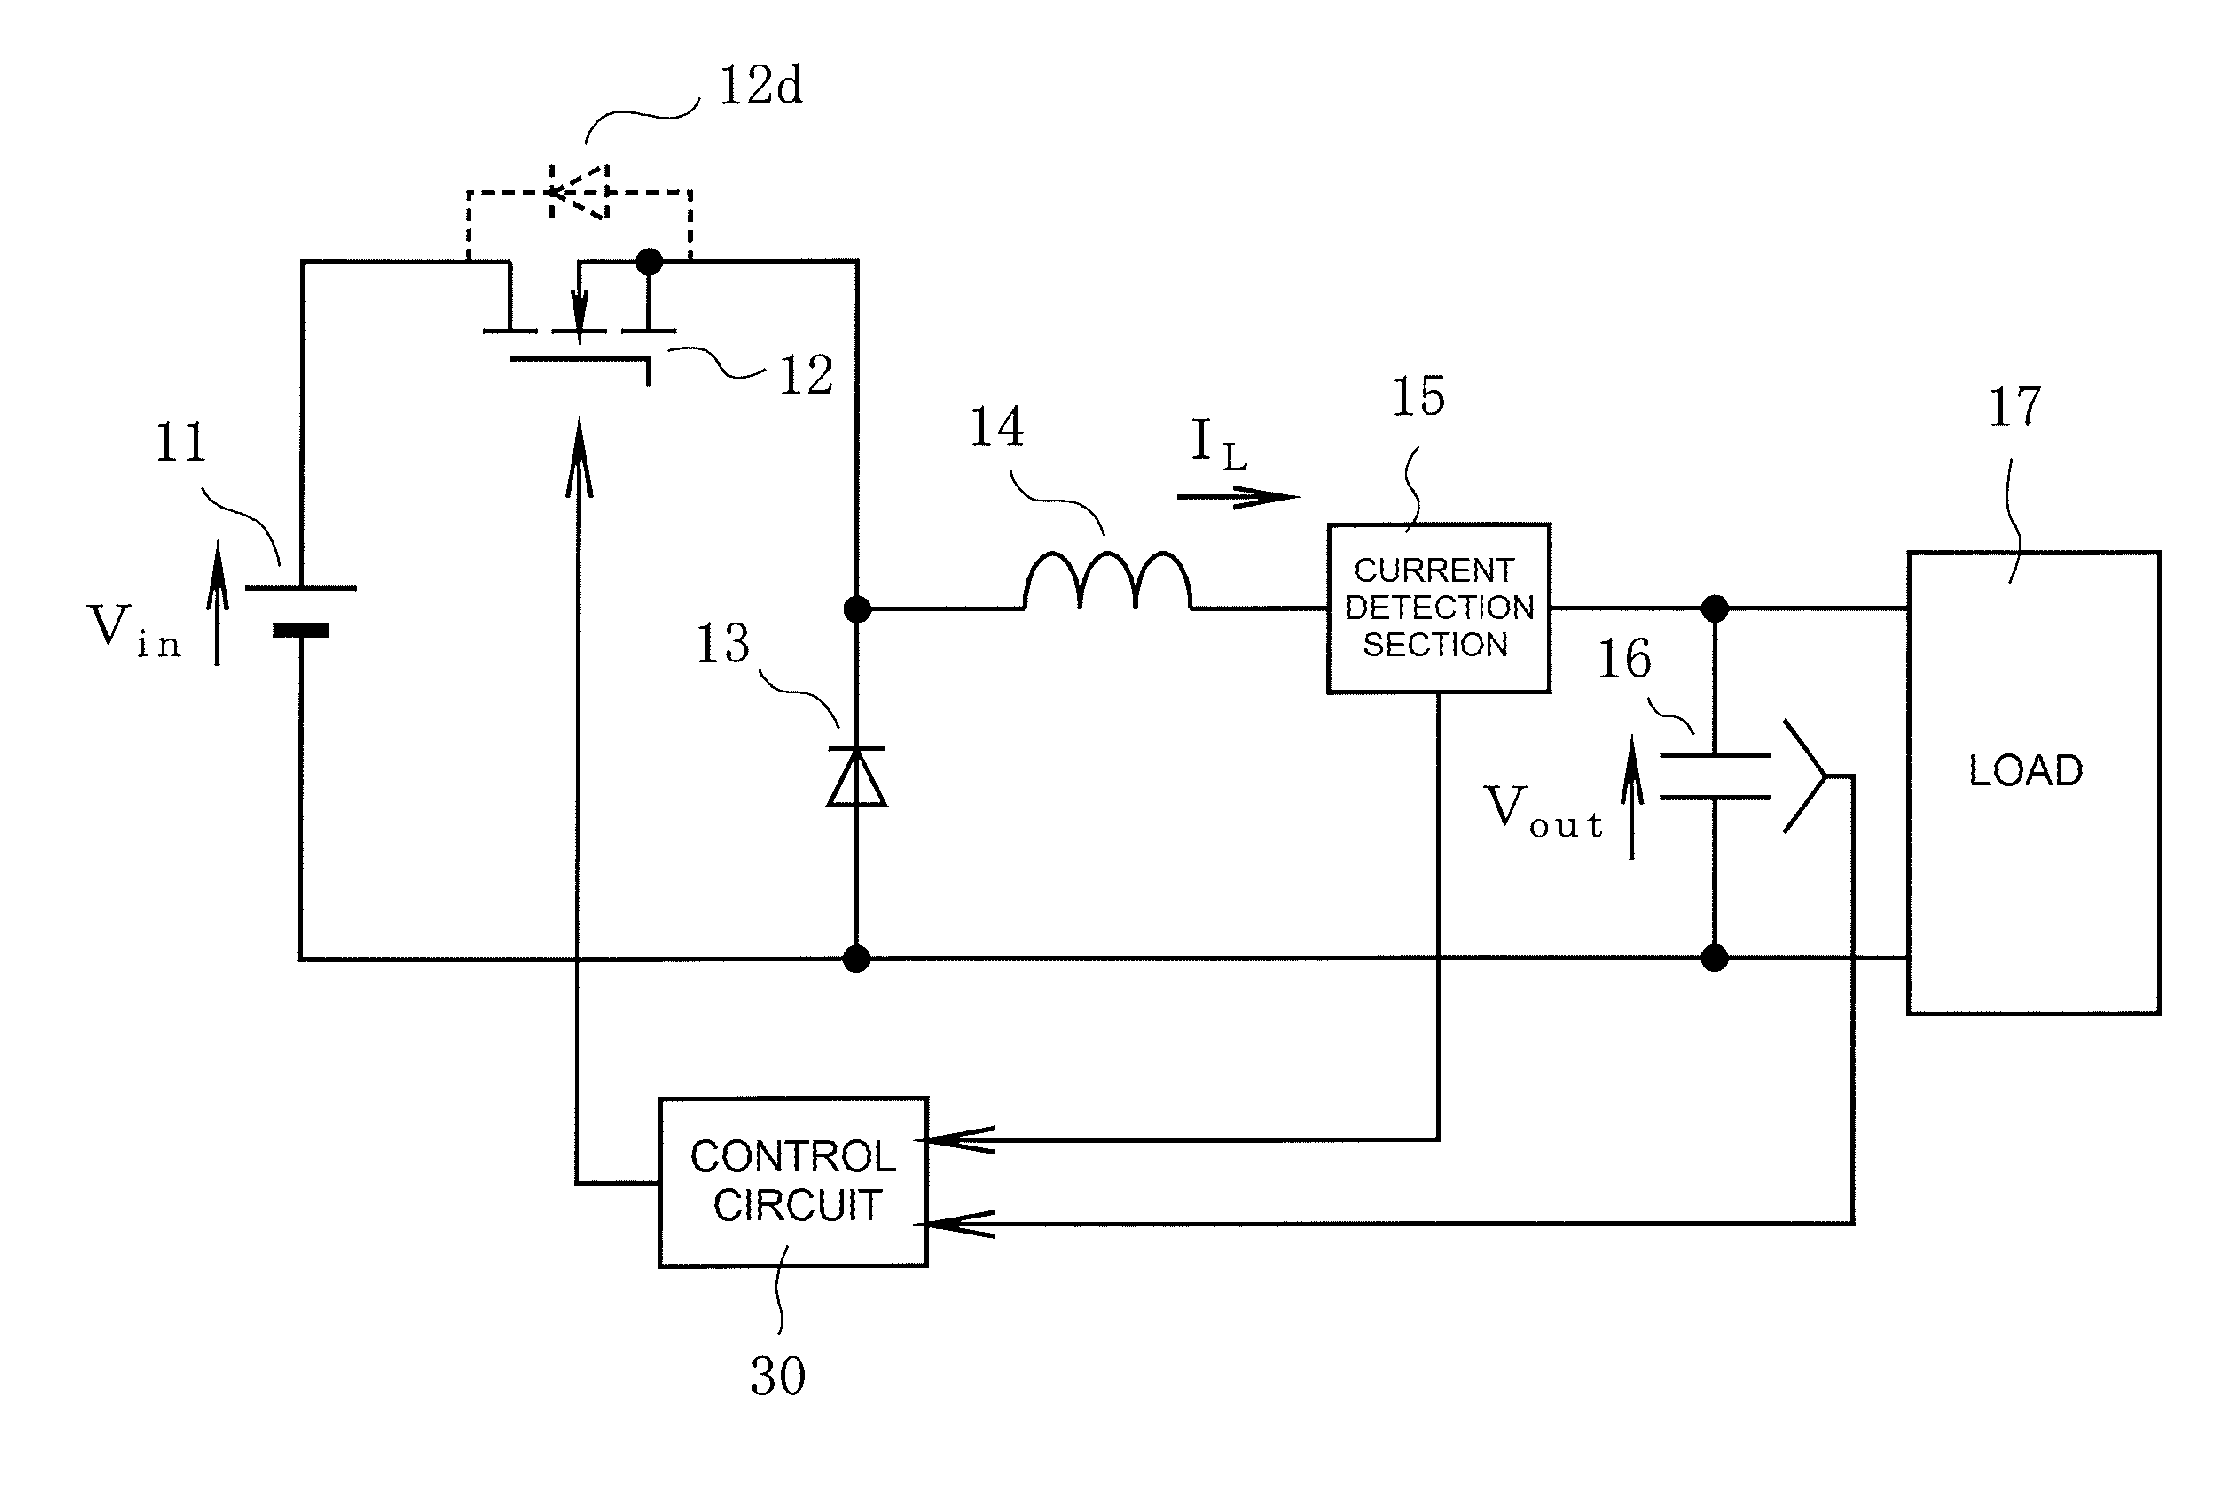 Current detector and power conversion device